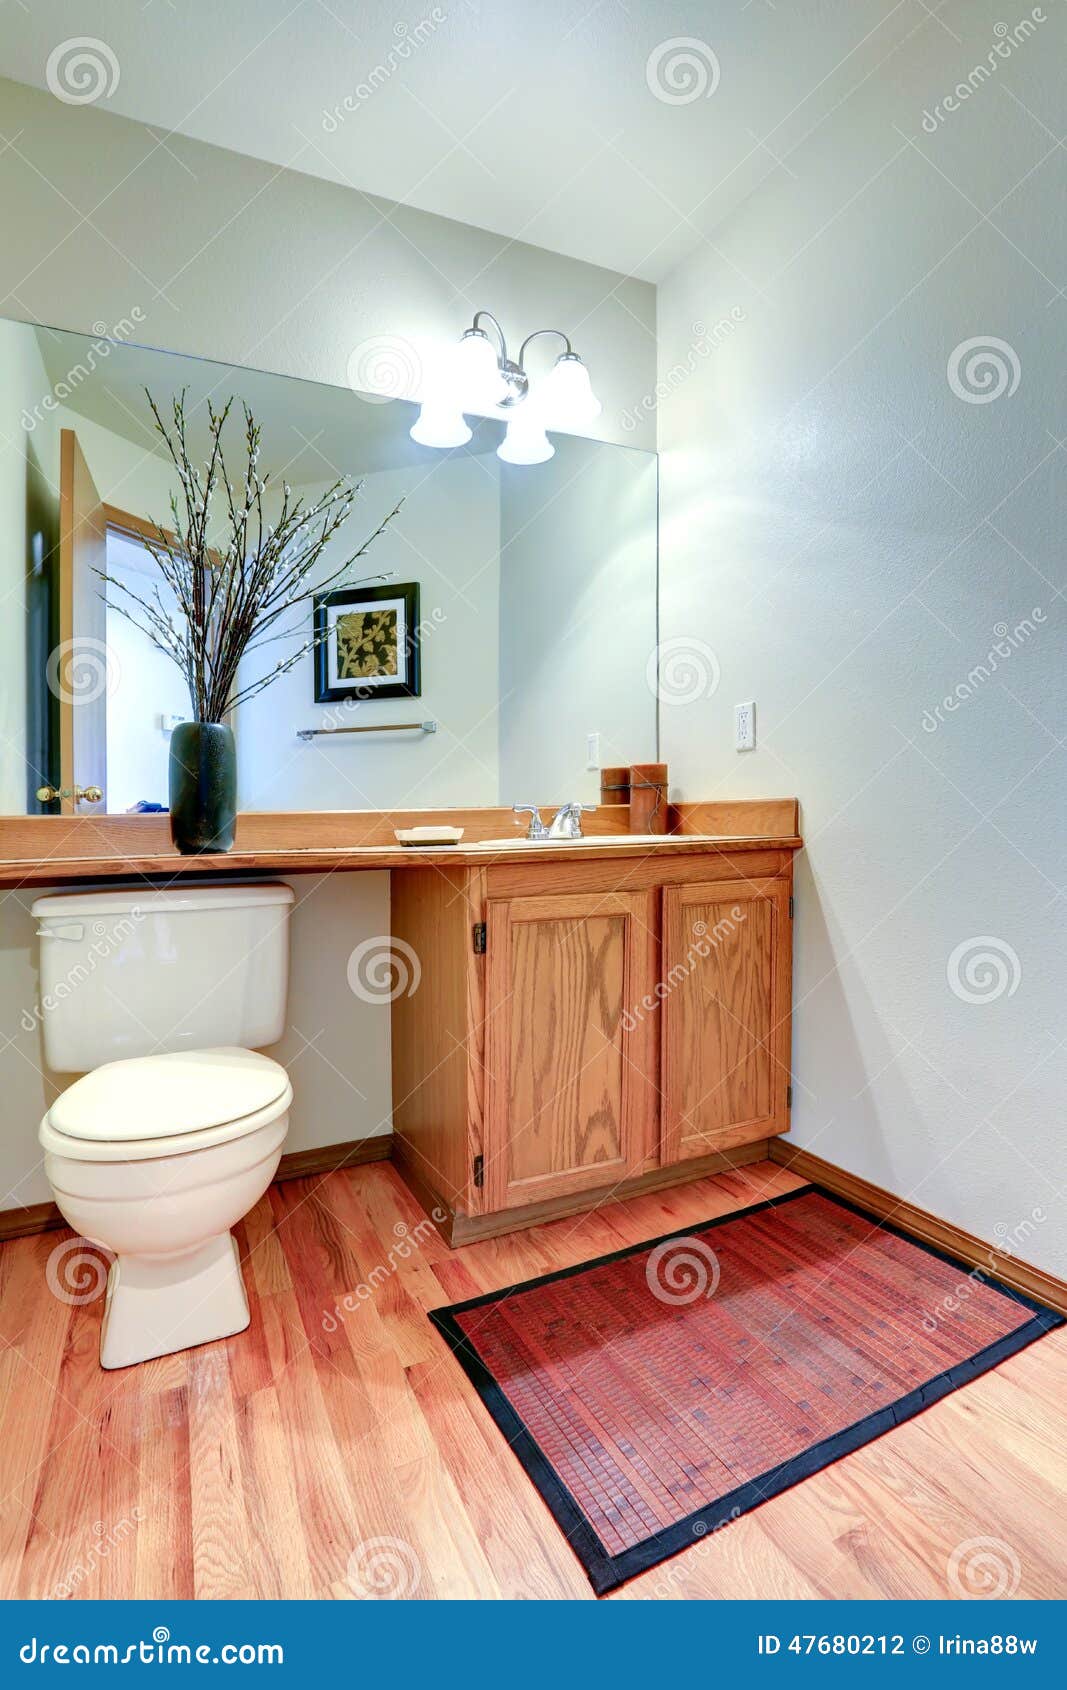 Bathroom Vanity Cabinet With Counter Top And Mirror Stock Photo Image Of Vase